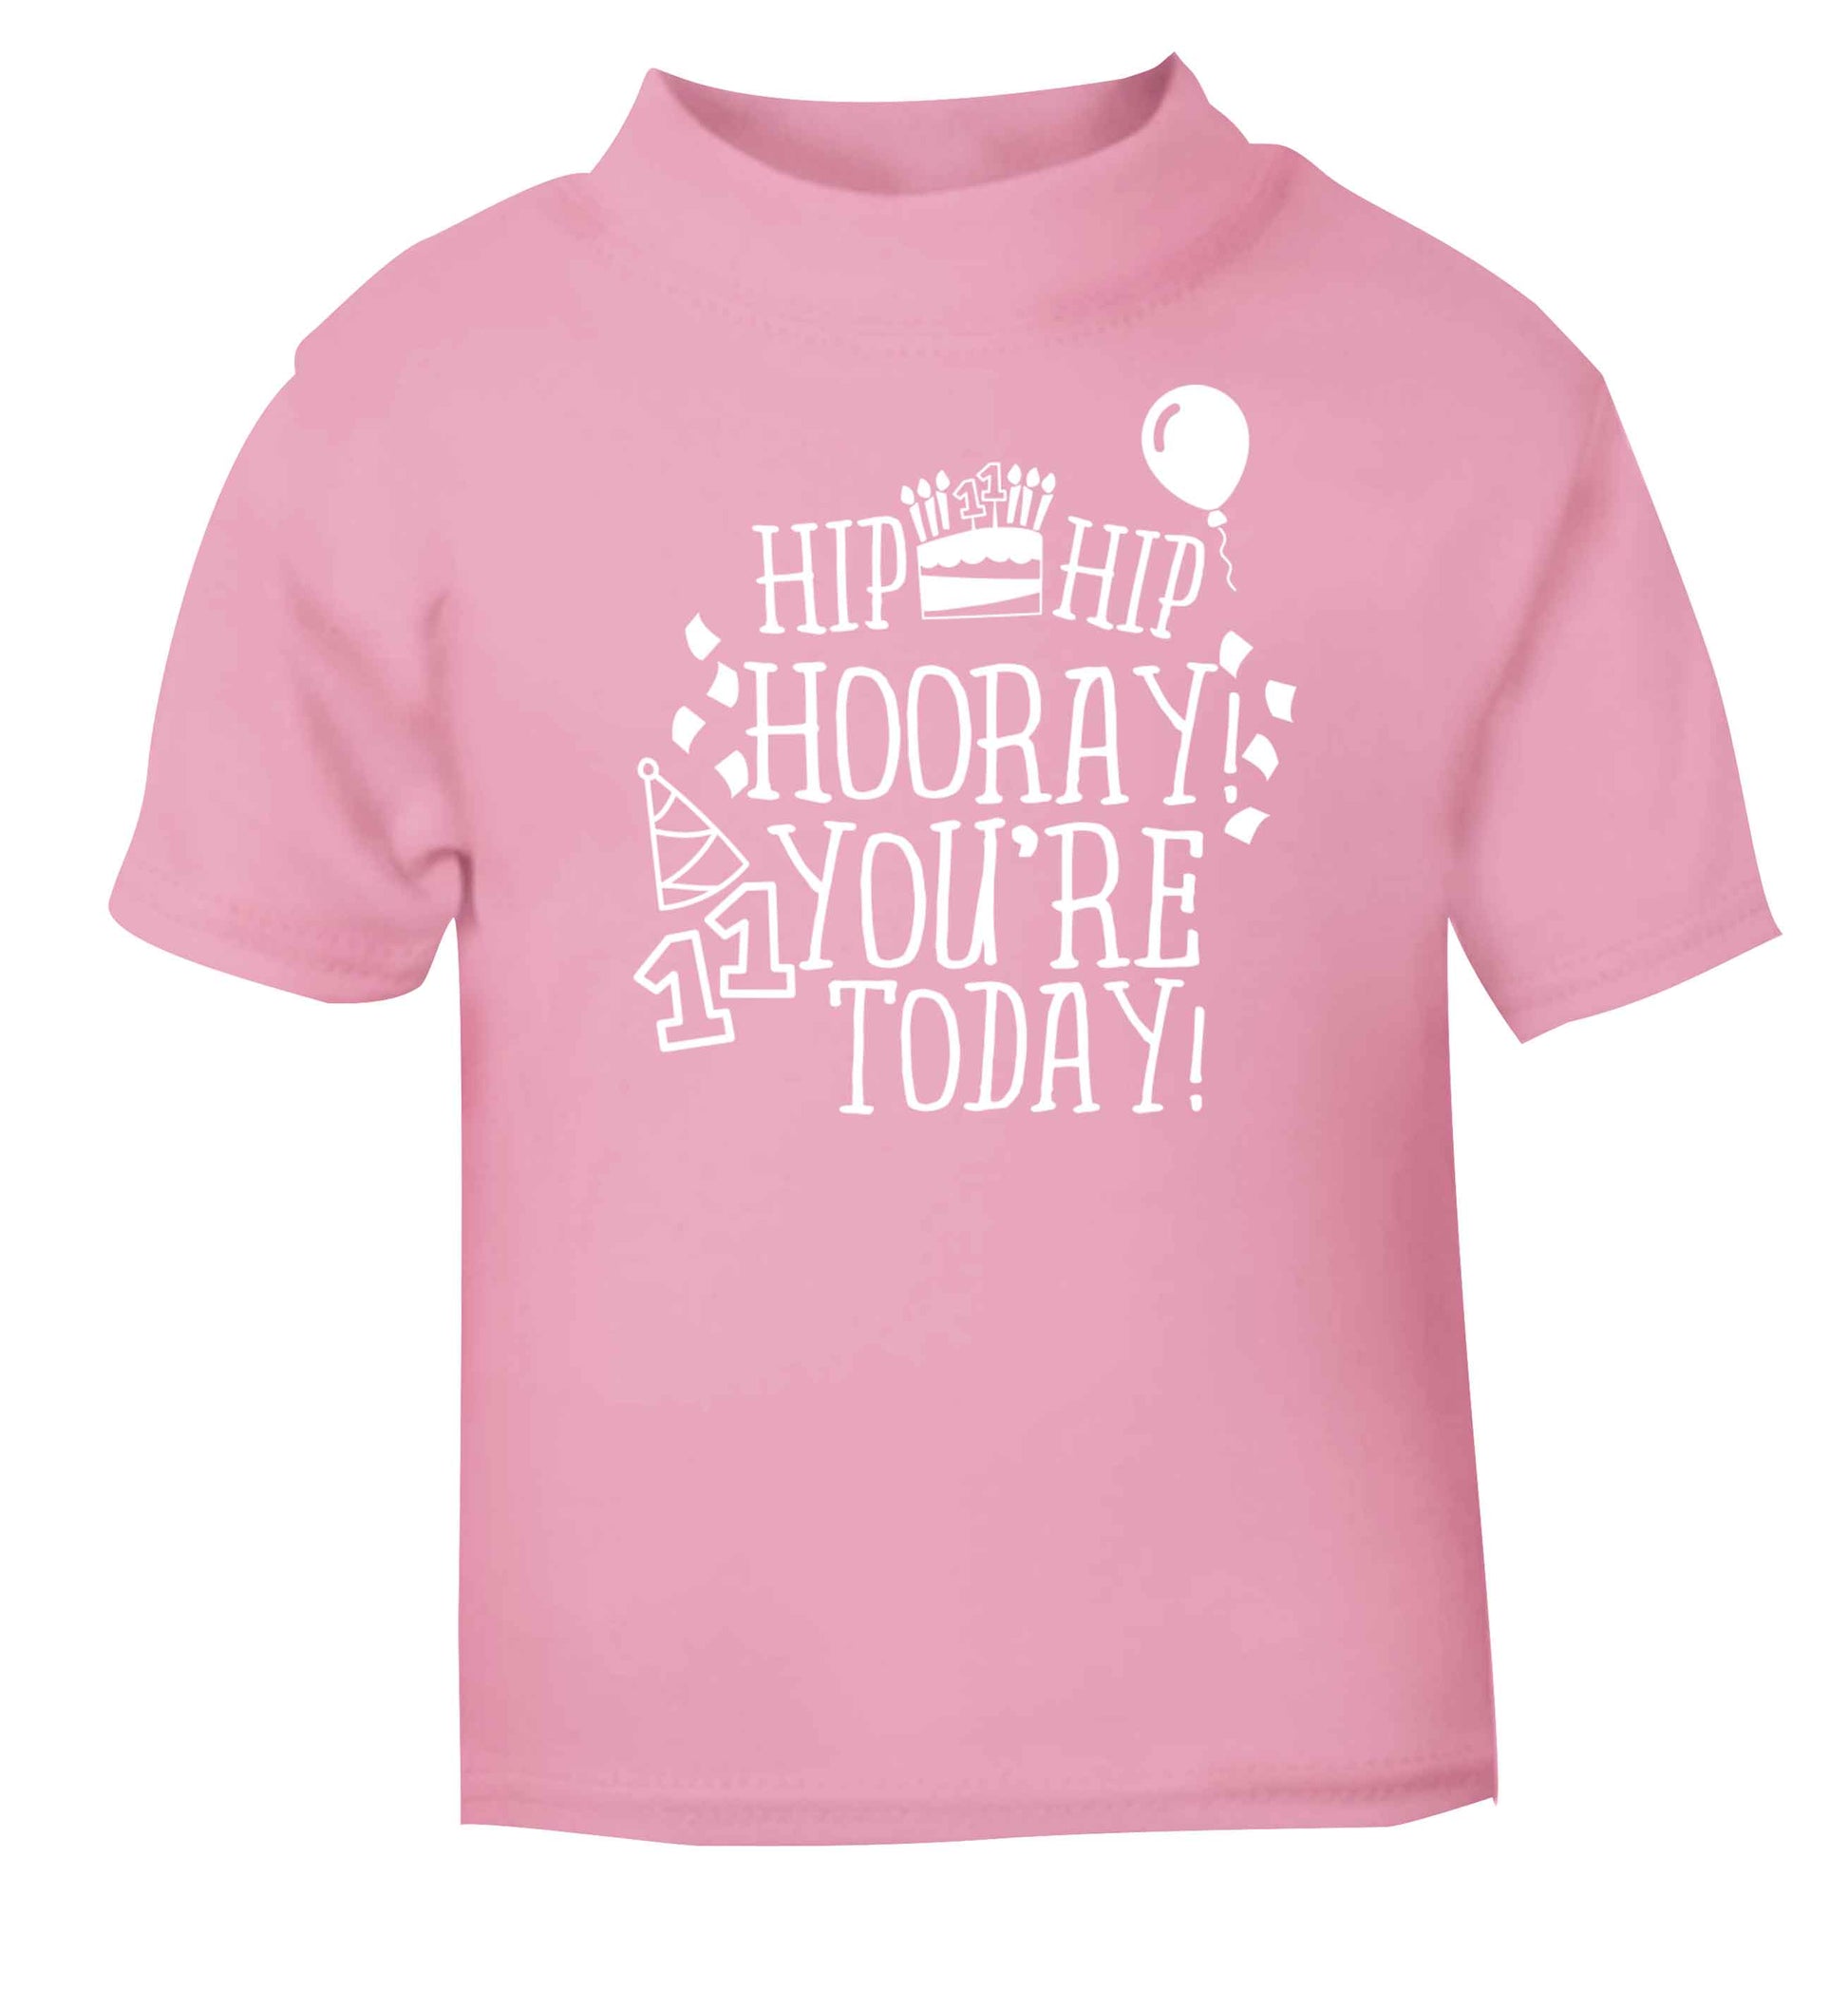 Hip hip hooray I you're eleven today! light pink baby toddler Tshirt 2 Years